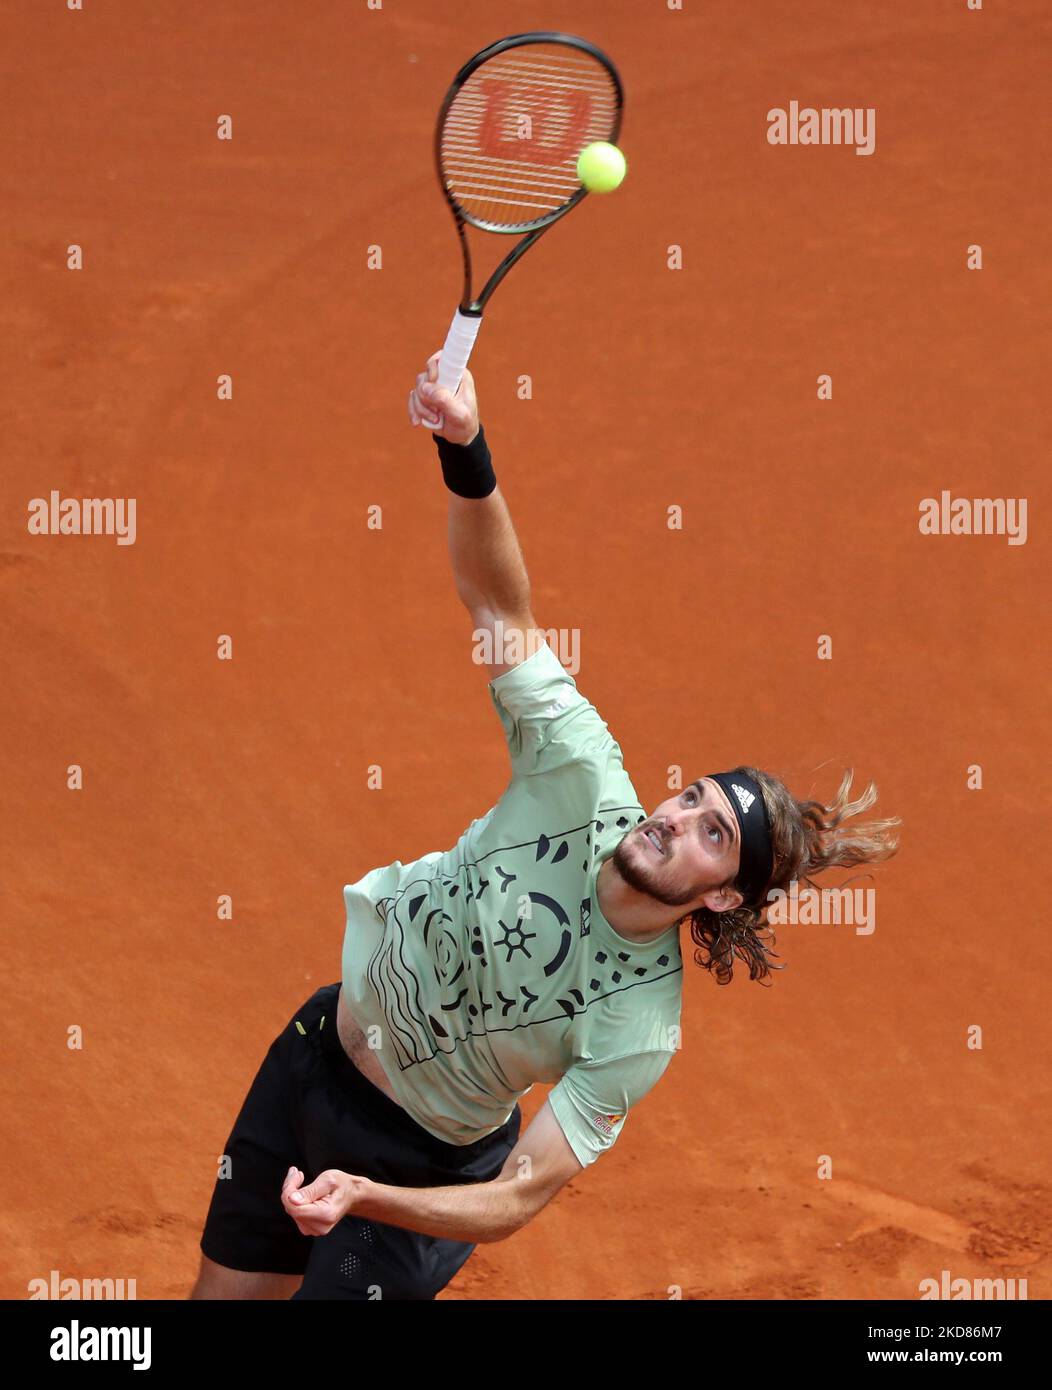 Stefanos Tsitsipas during the match against Ilya Ivashka, corresponding to the Barcelona Open Banc Sabadell tennis tournament, 69th Conde de Godo Trophy, in Barcelona, on 20th April 2022